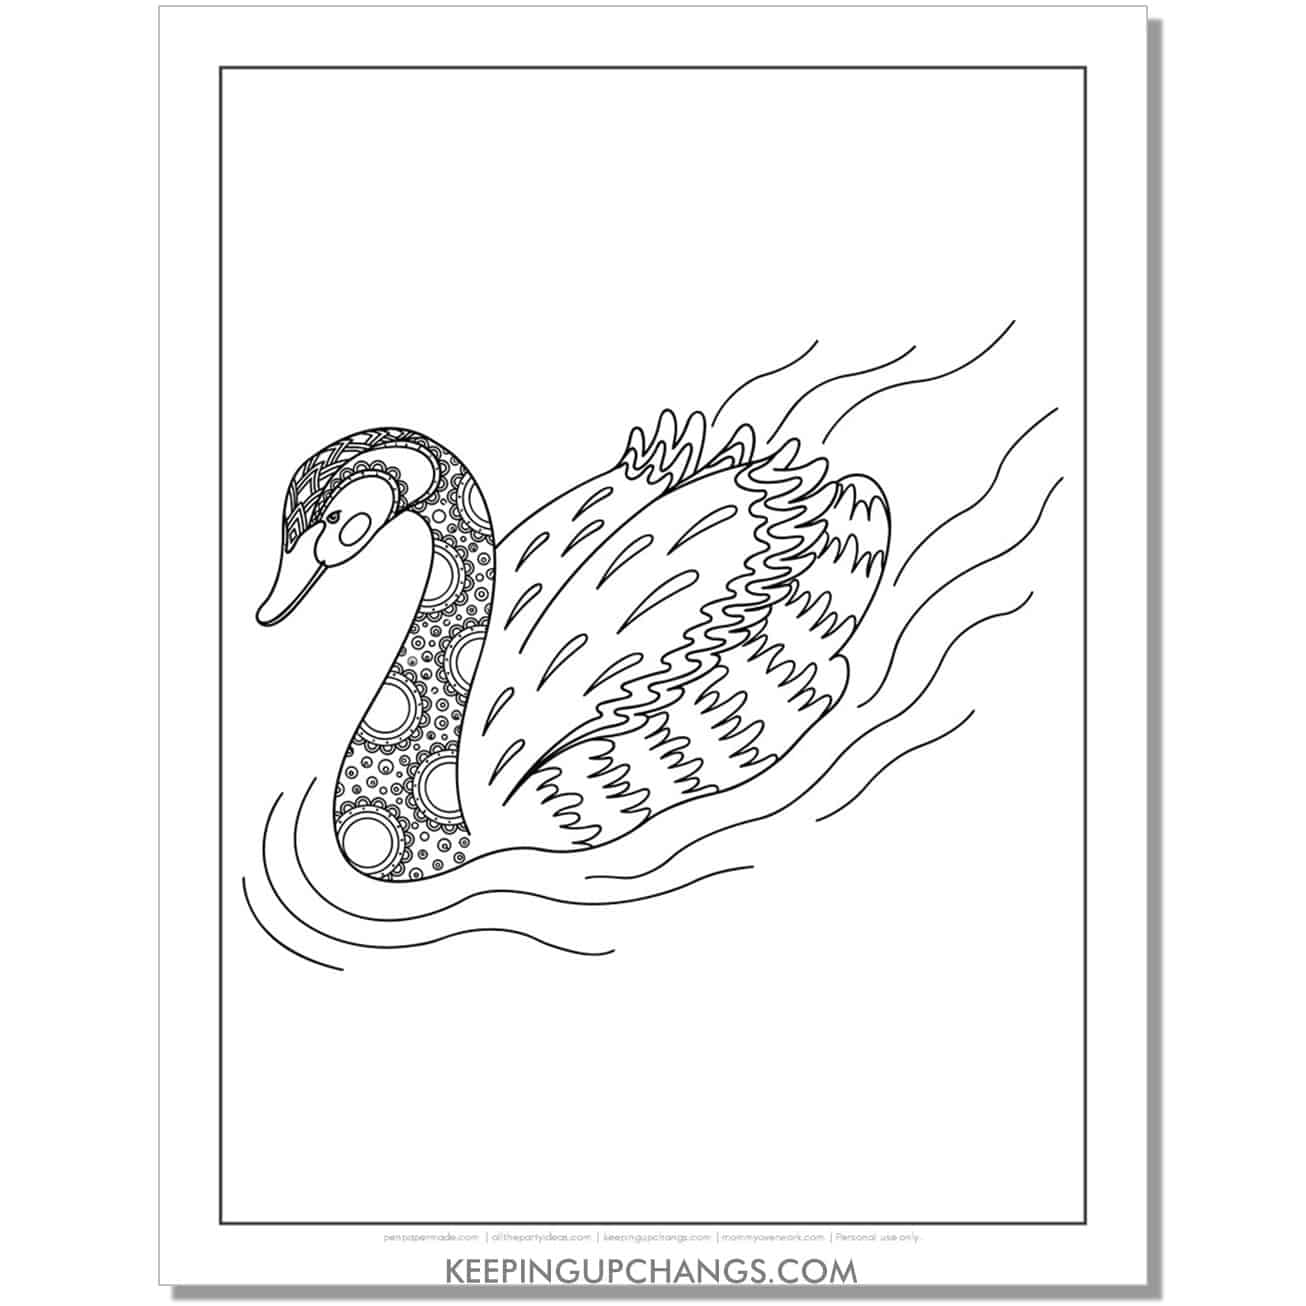 swan swimming downriver coloring page.